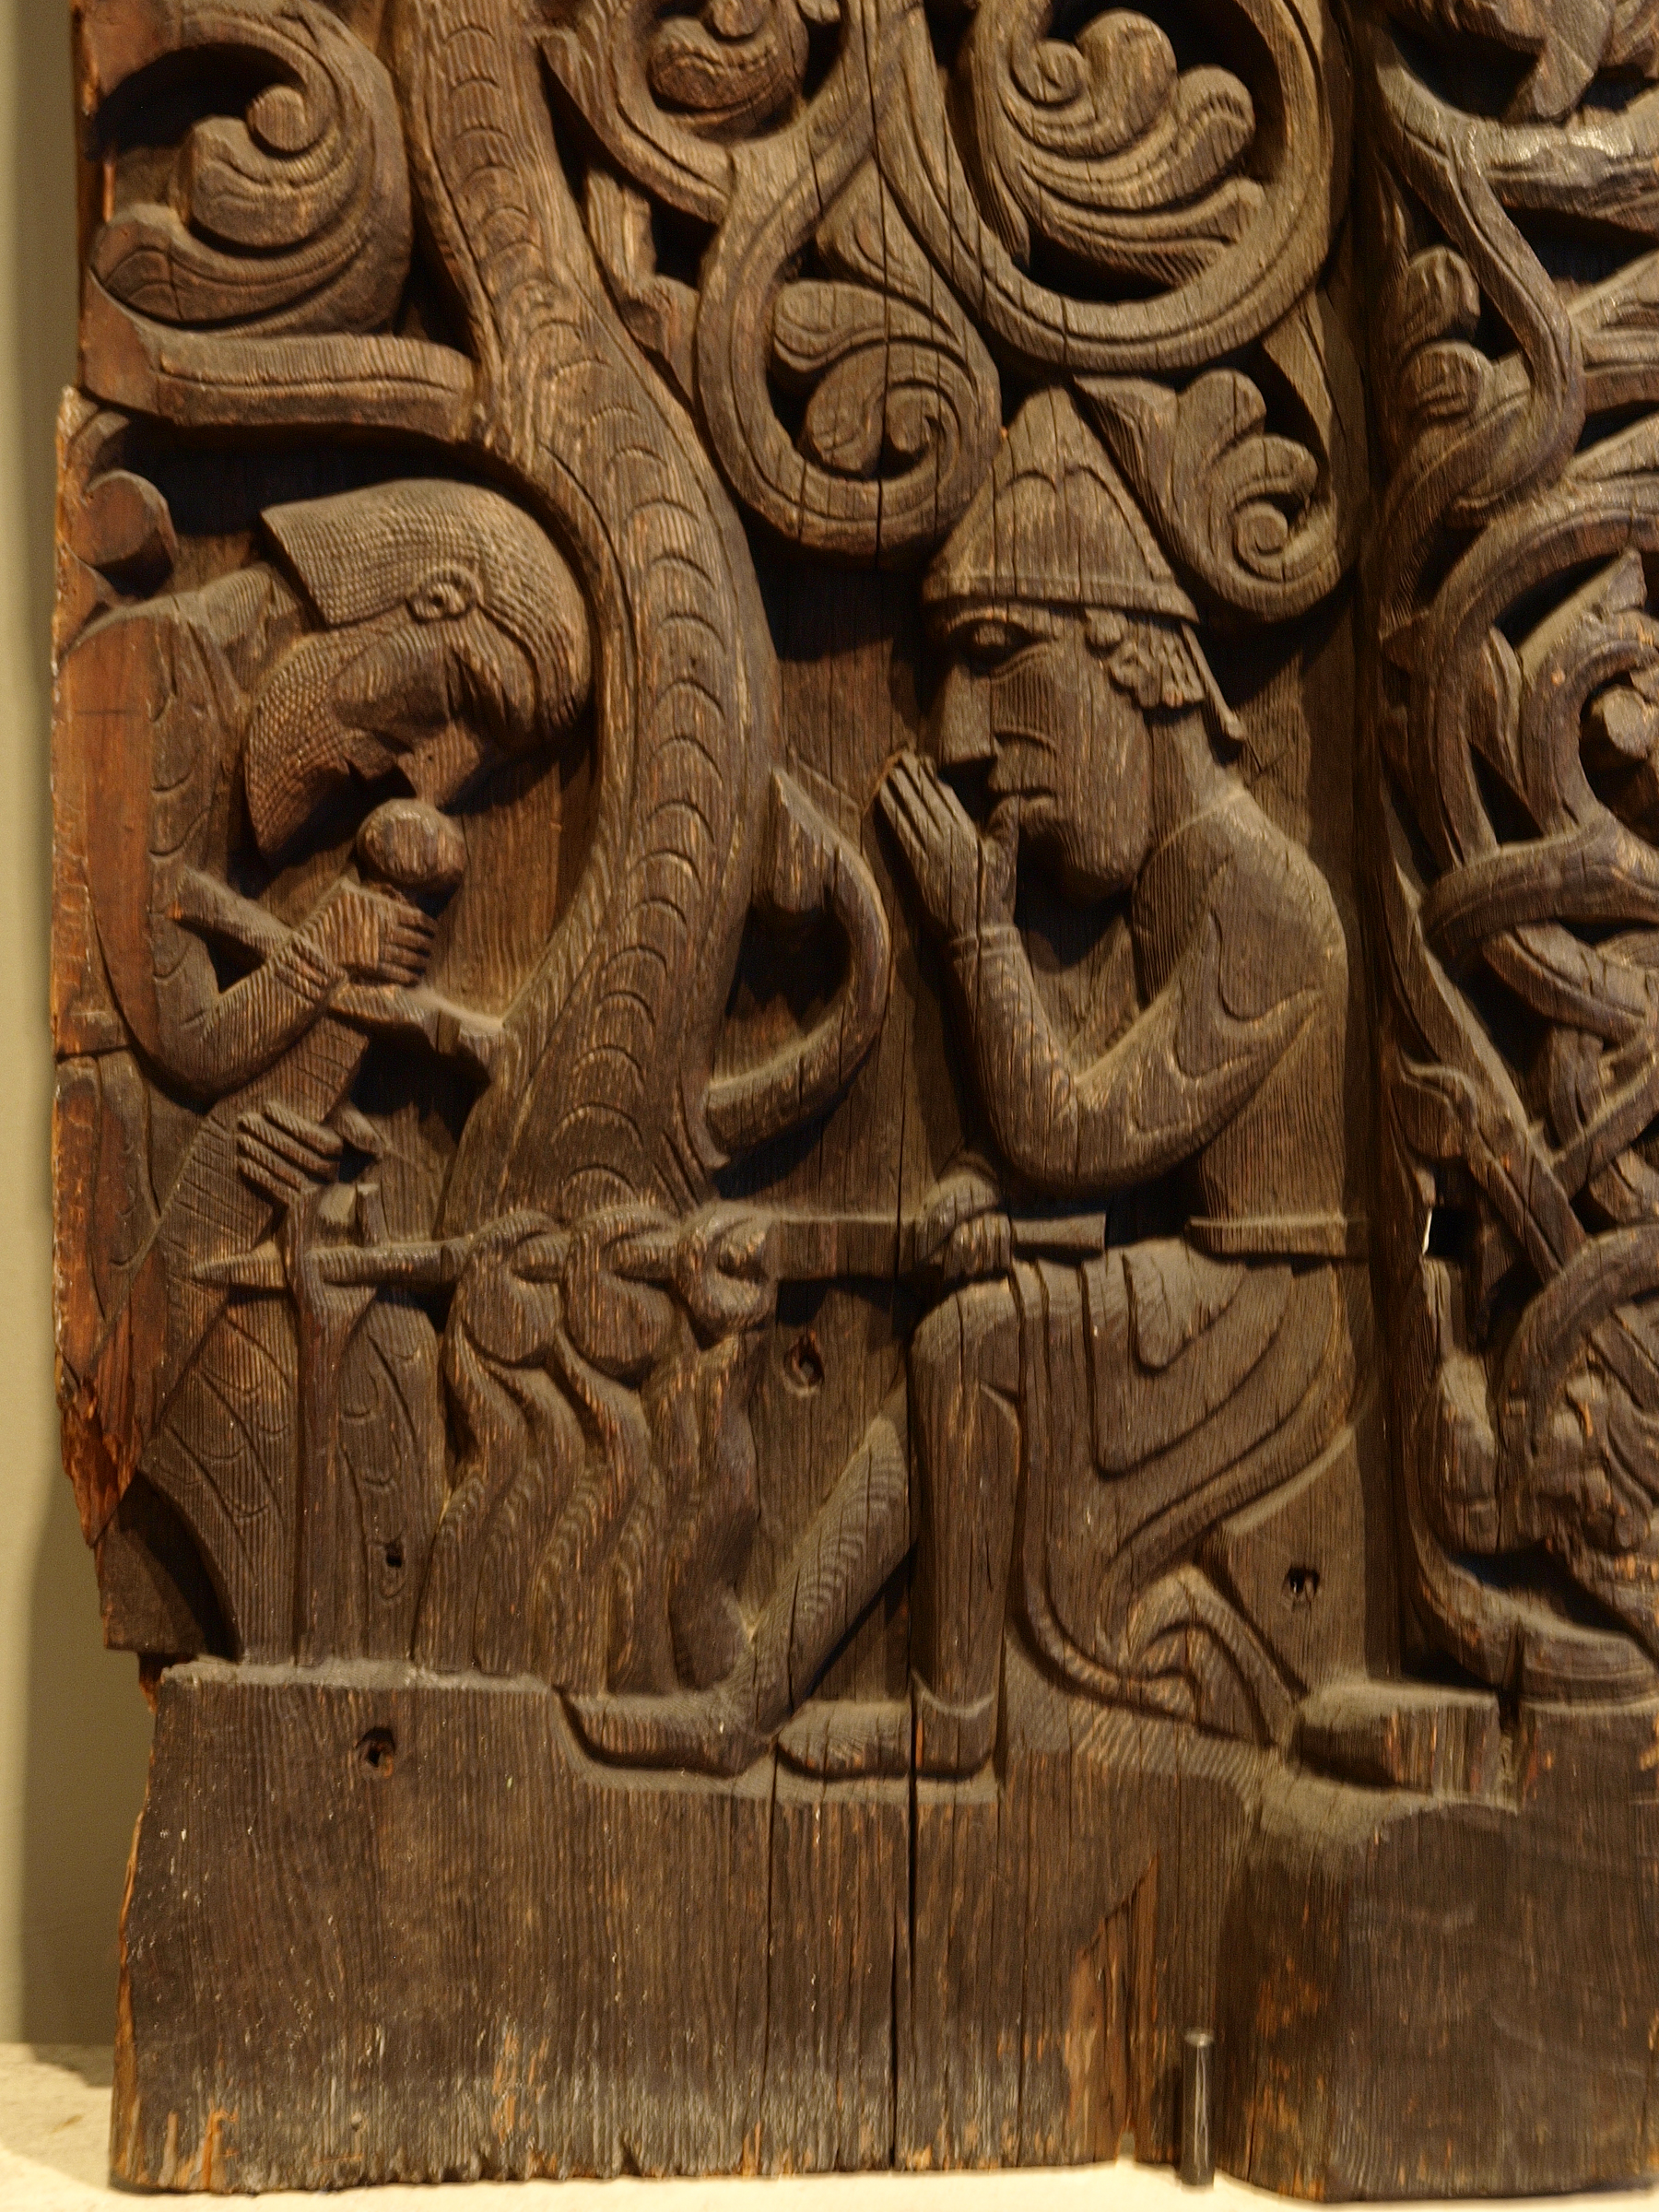 From the Hylestad stavechurch, this scene shows Sigurðr roasting the dragon's heart. After sucking his finger with the blood on, he was able to understand the speech of birds. Photo: Marieke Kuijjer / Wikimedia Commons 